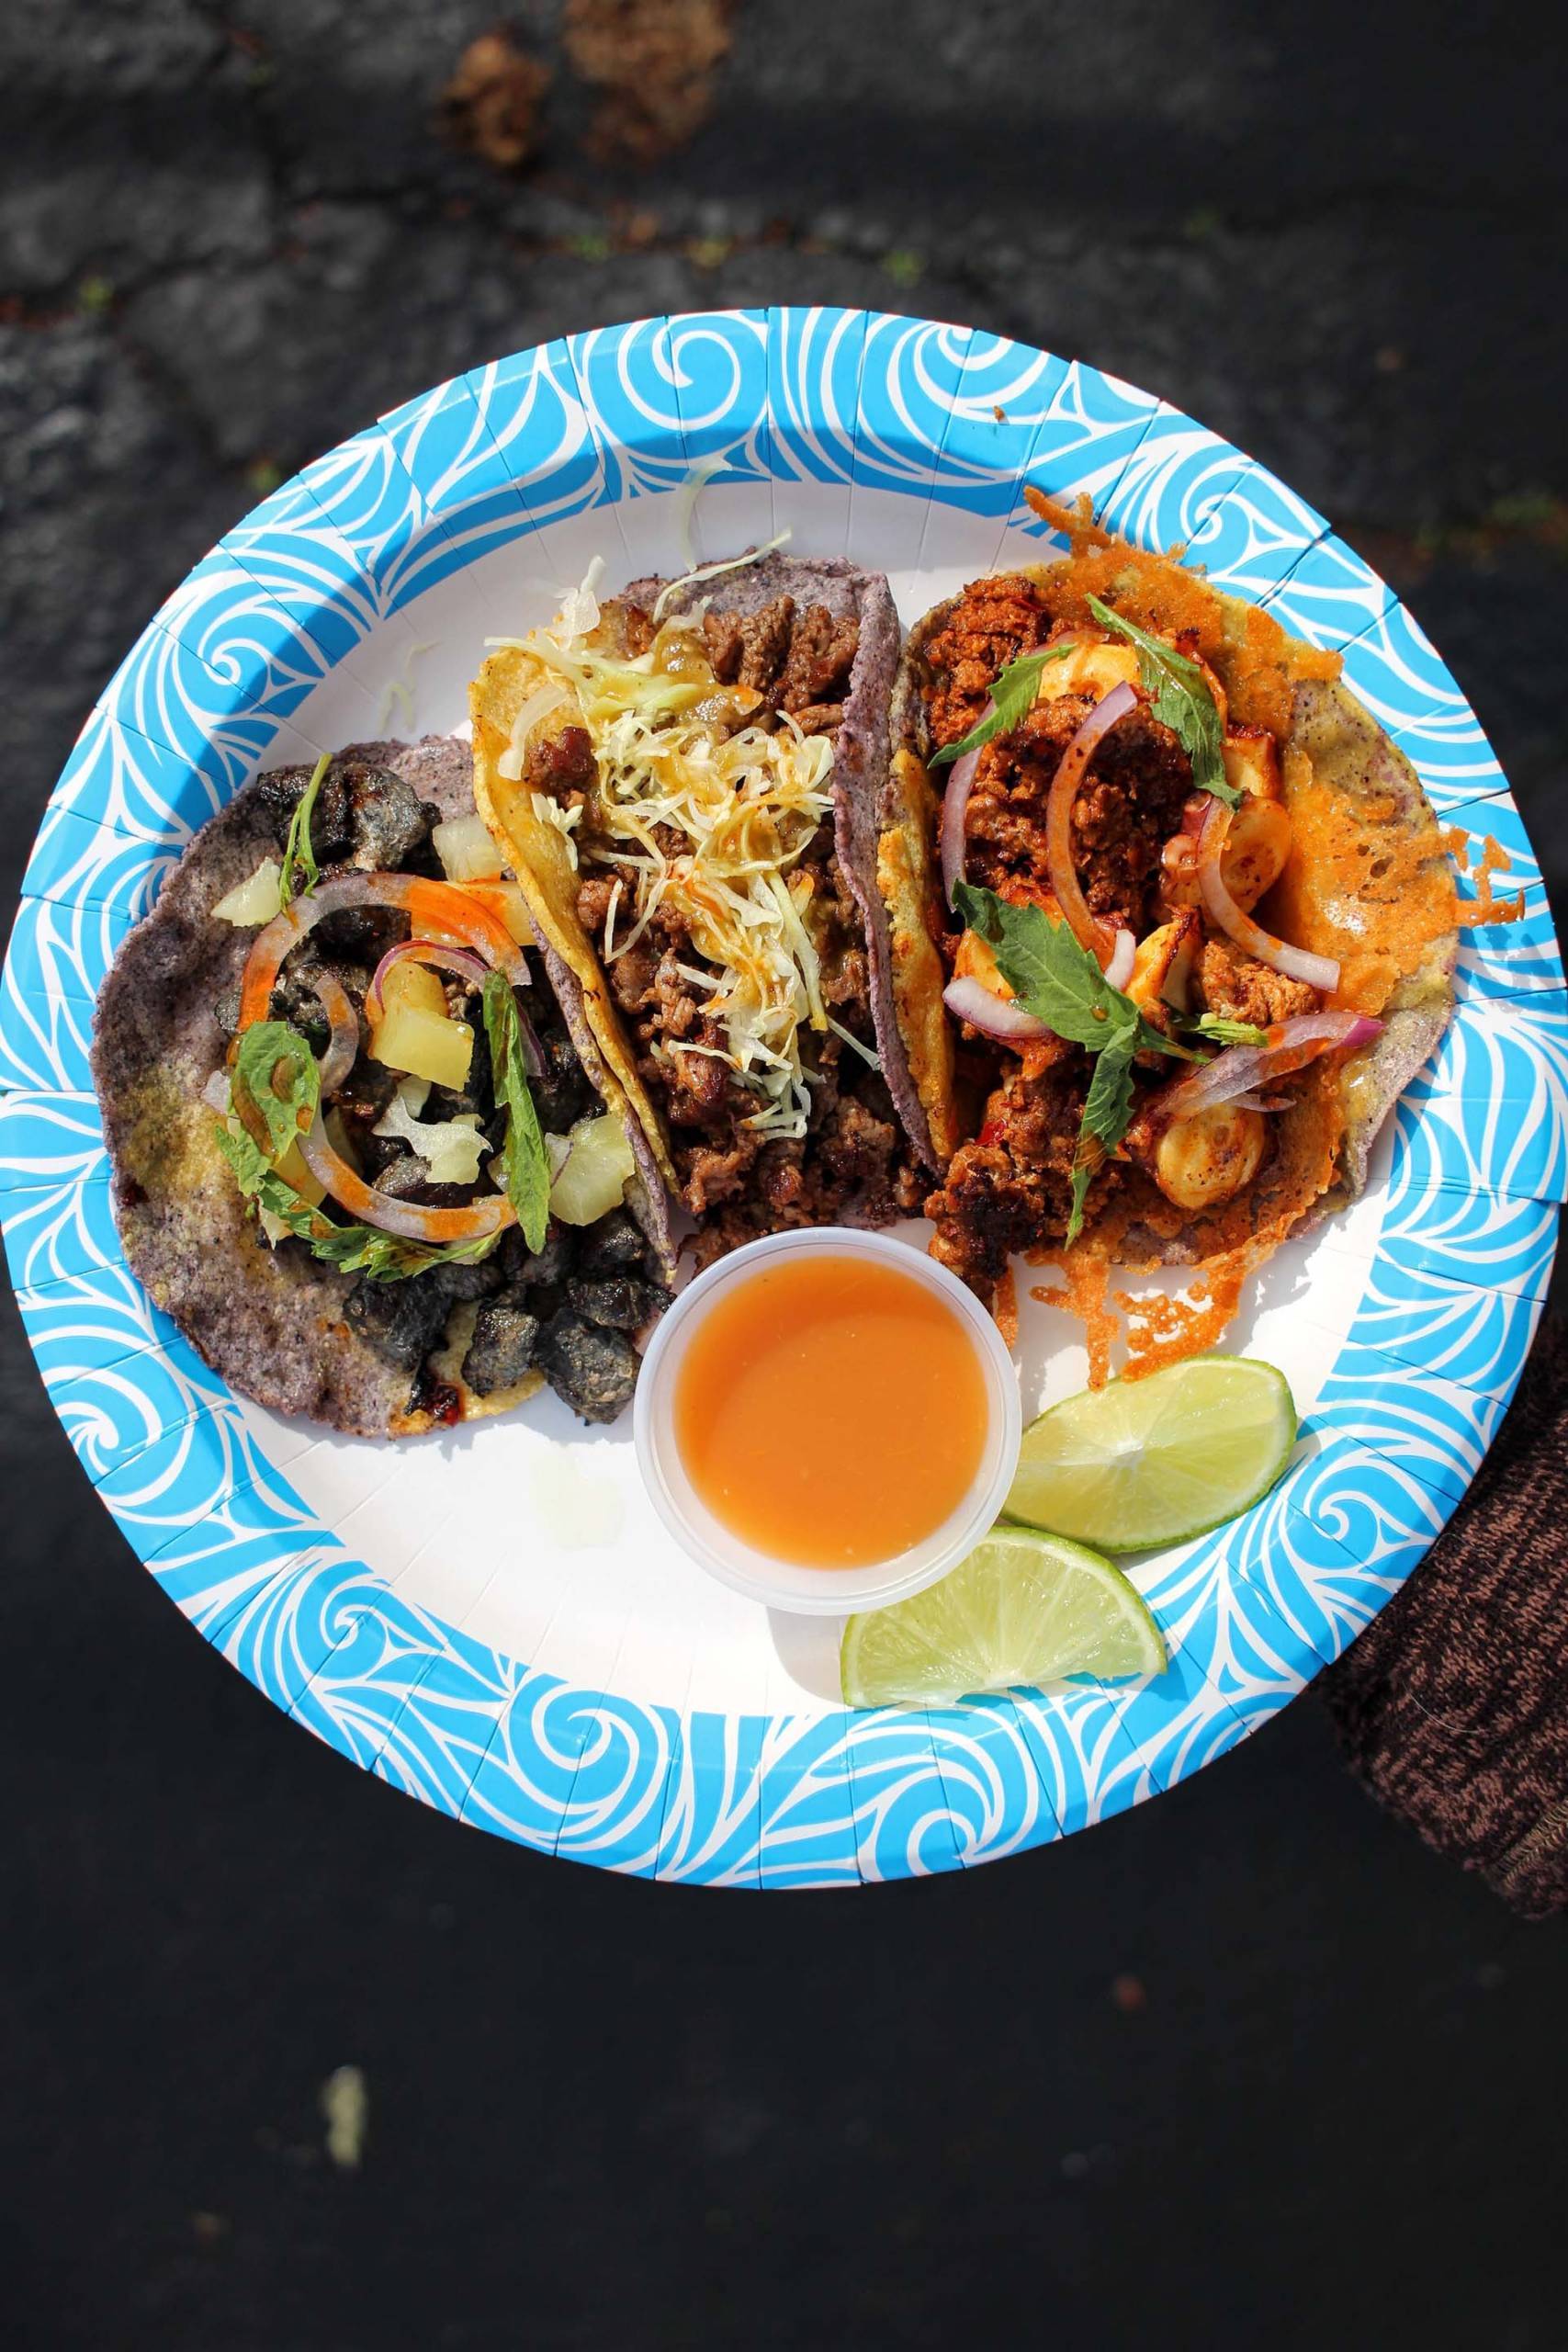 Overhead view of a plate of four tacos, with a side of bright orange salsa.